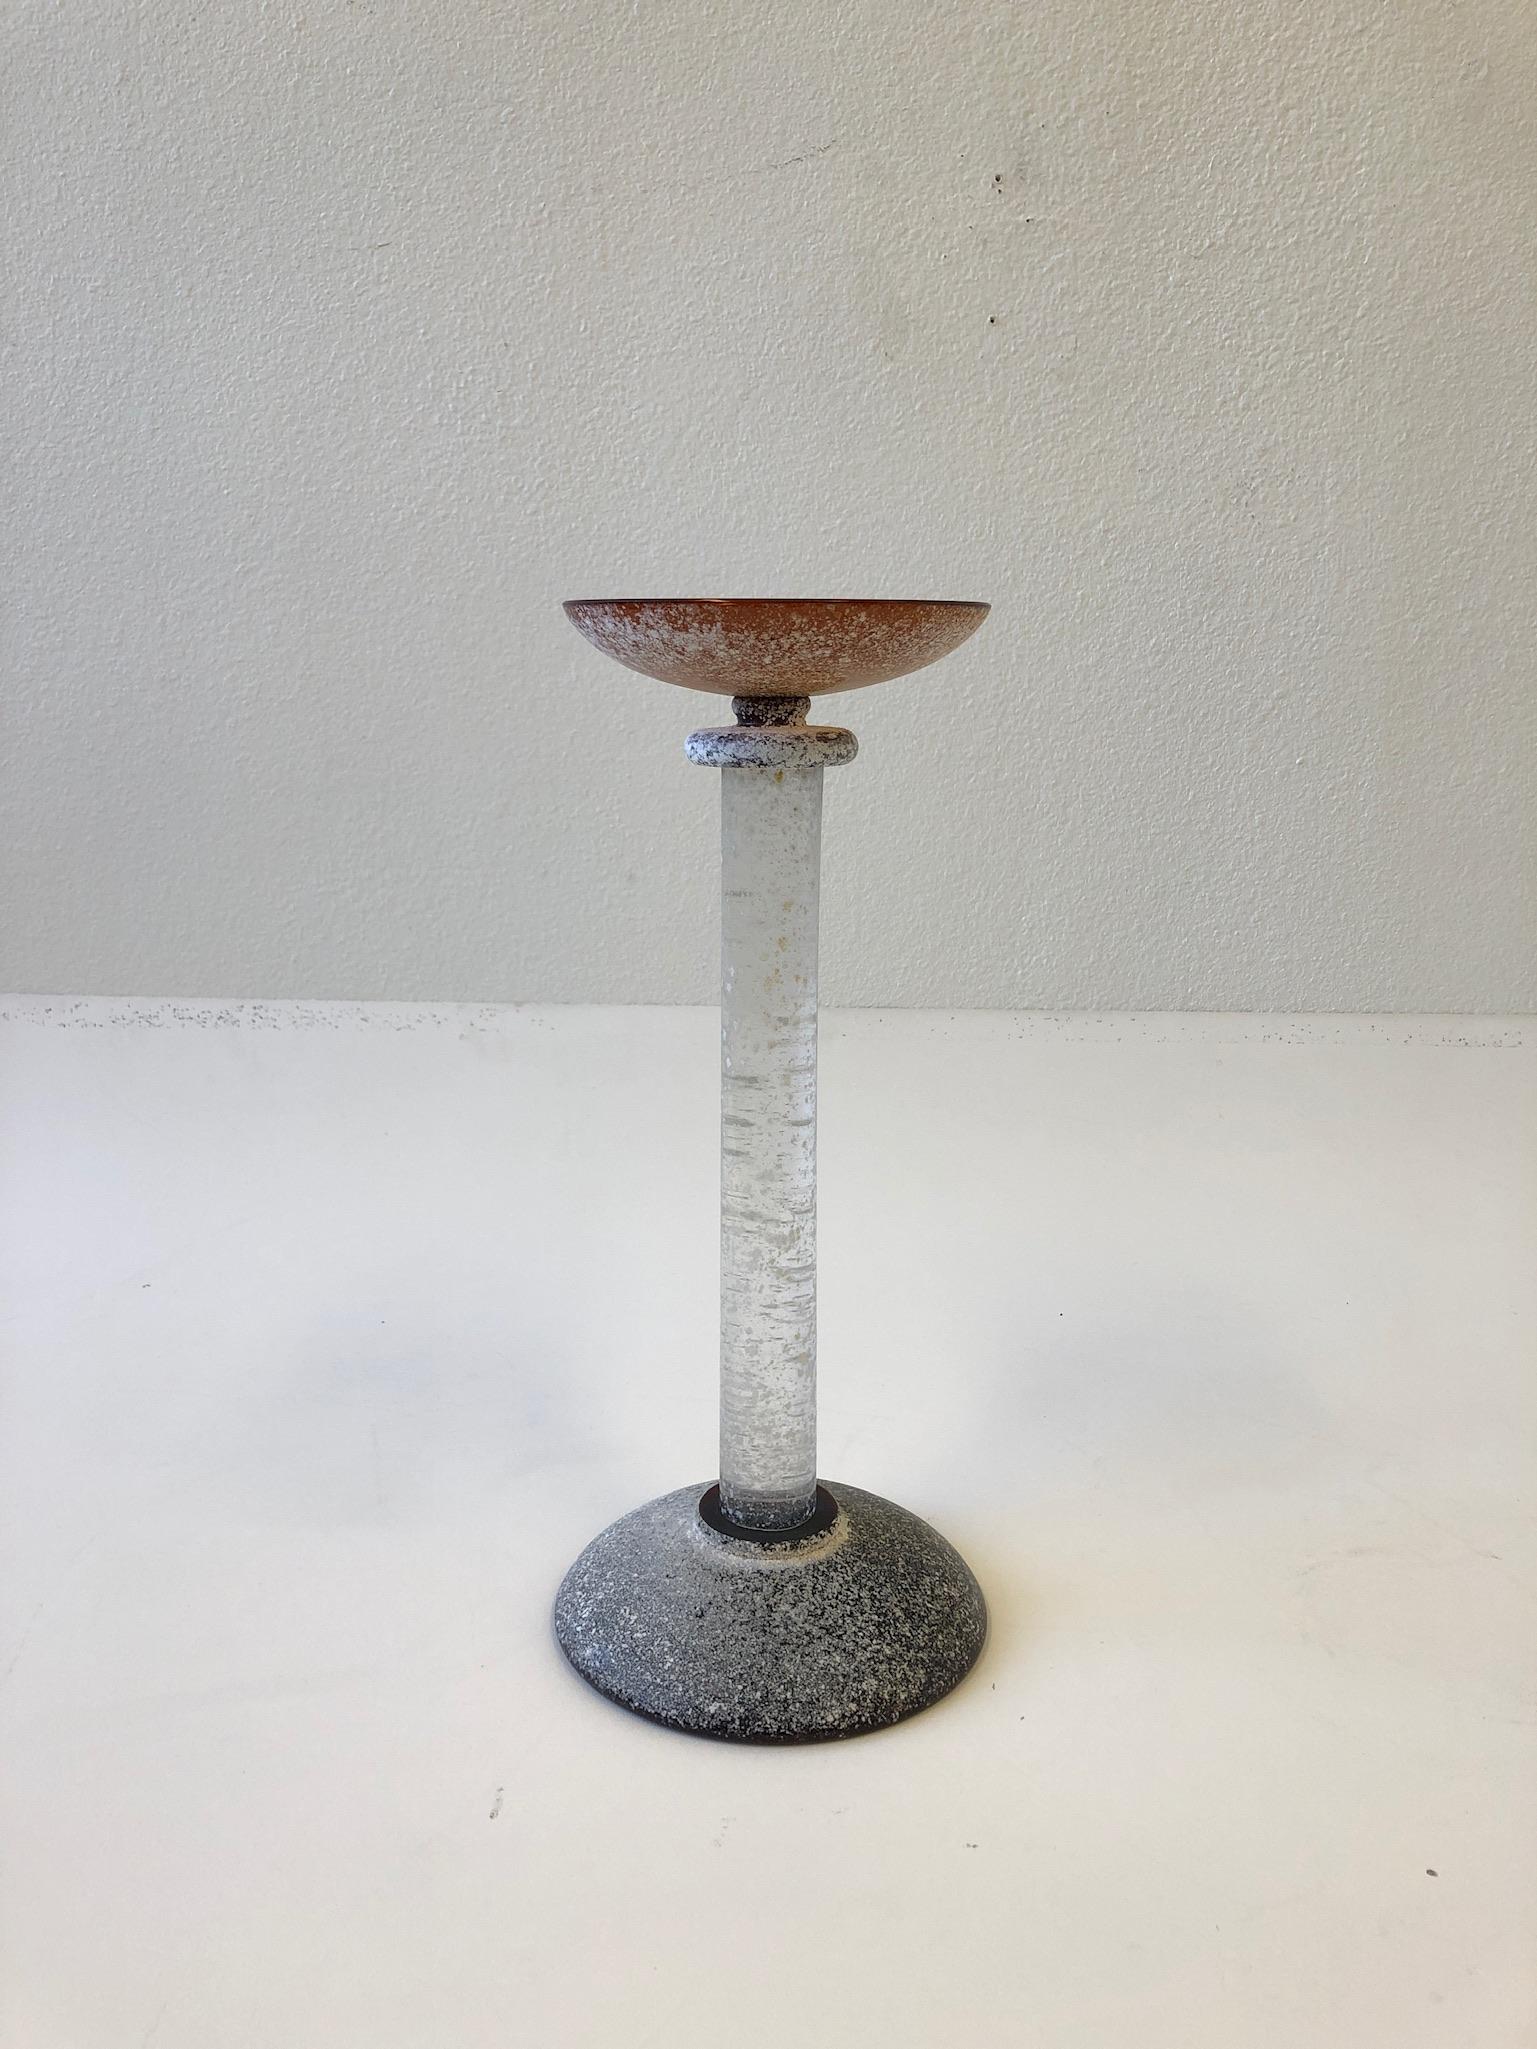 1980’s glamorous Italian Scavo Murano glass candlestick designed by Karl Springer for Seguso. 
Constructed of rough texture amber and clear Murano glass. 
Measurements: 18.25” high and 8” diameter.